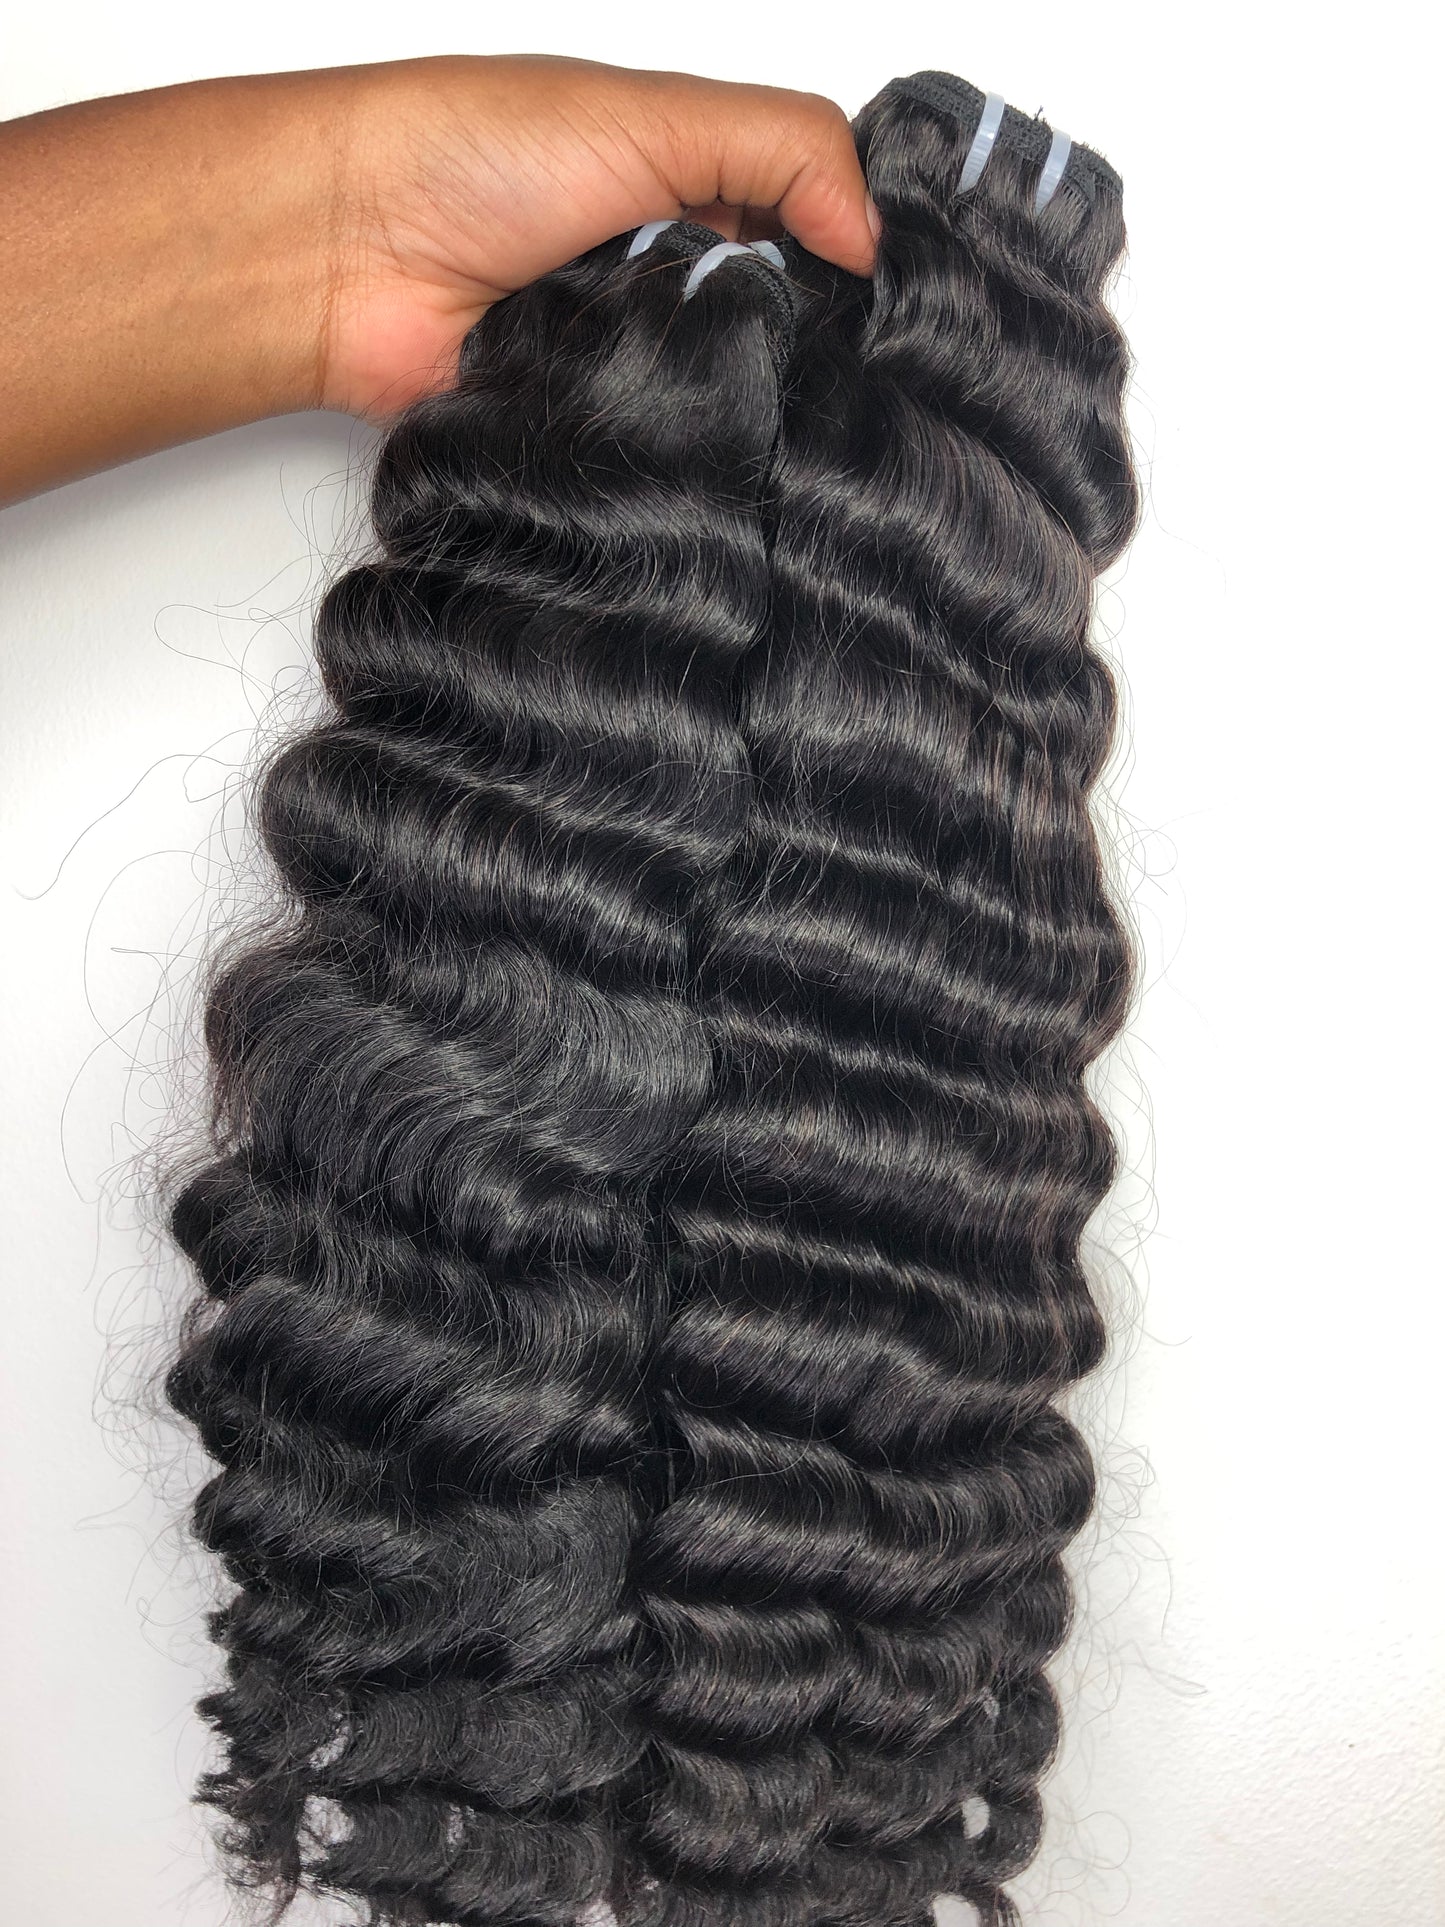 Water Wave Curly Hair Extensions human hair bundle deals